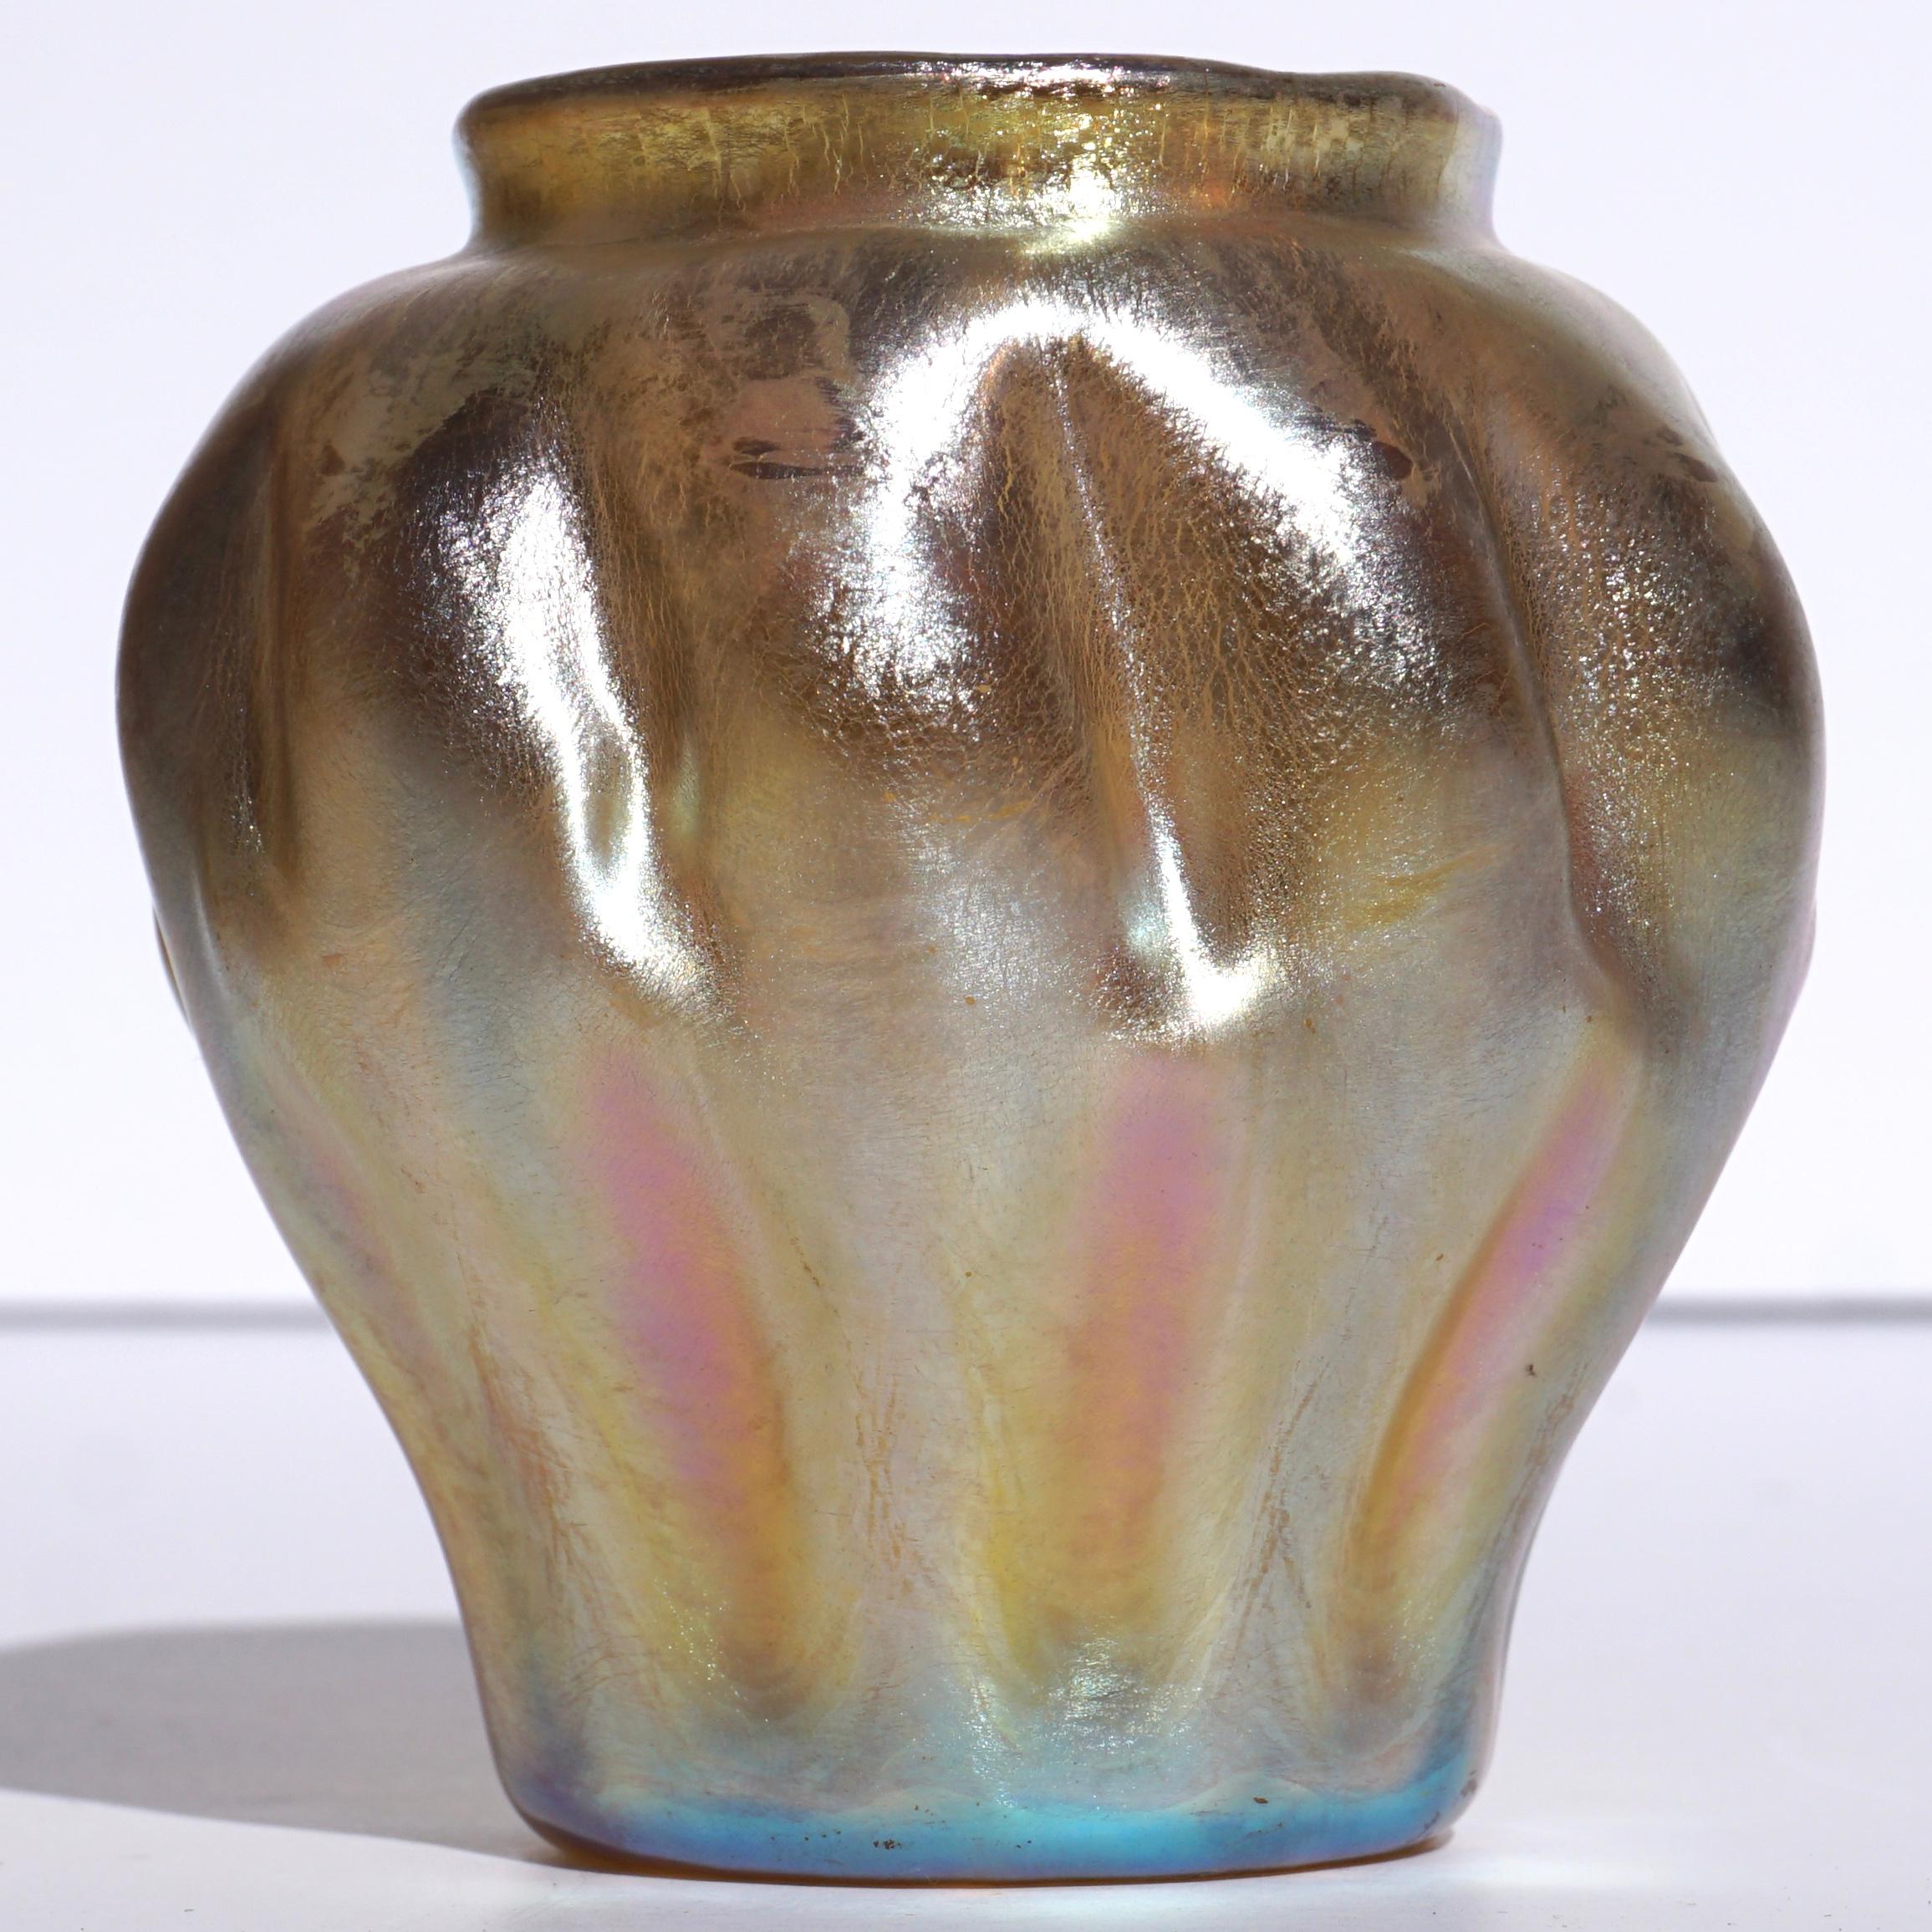 A great Tiffany favrile gold cabinet vase with beautiful pink and glue iridescence. The globular decorated pinched design screams Art Nouveau and was probably made circa 1895.

Engraved signature: “L.C.Tiffany Favrile 5406E”

Measures: Height